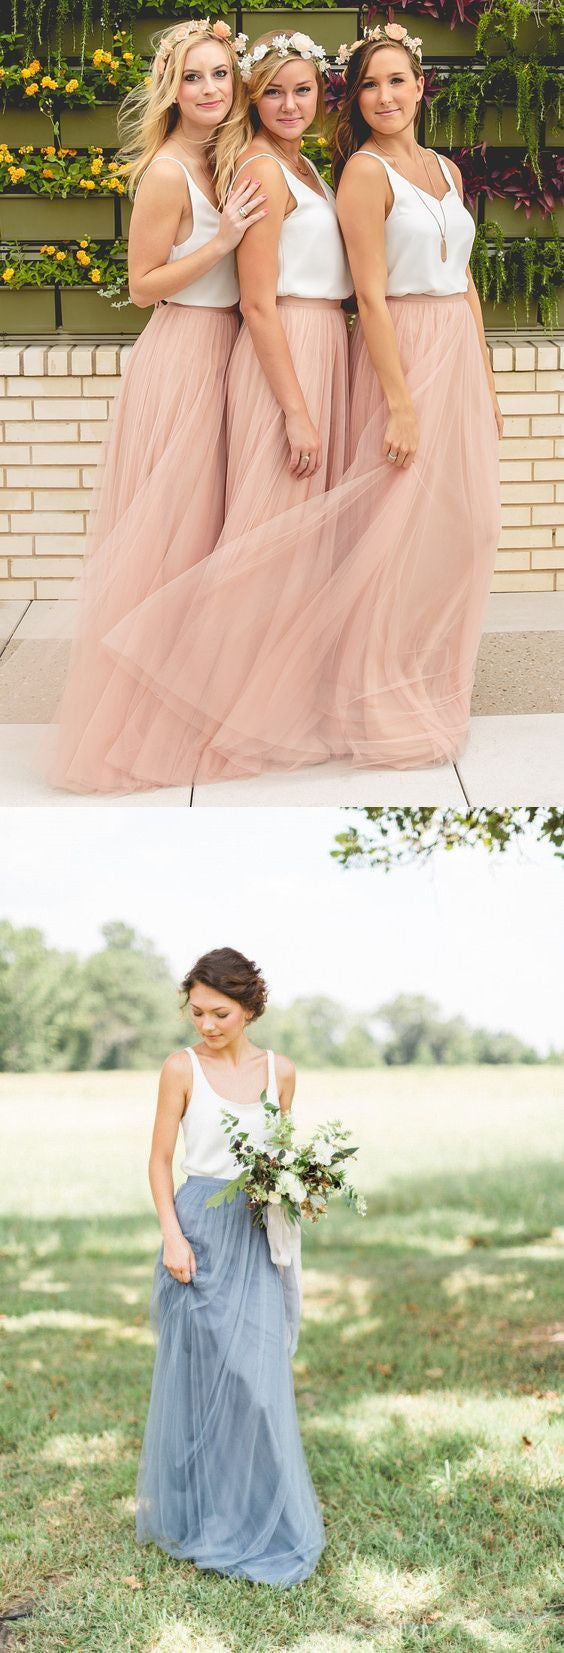 Dusty Pink Boho Bridesmaid Dresses,Rustic Bridesmaid Dresses,Tulle Skirt Bridesmaid Dresses,Fs015-Dolly Gown